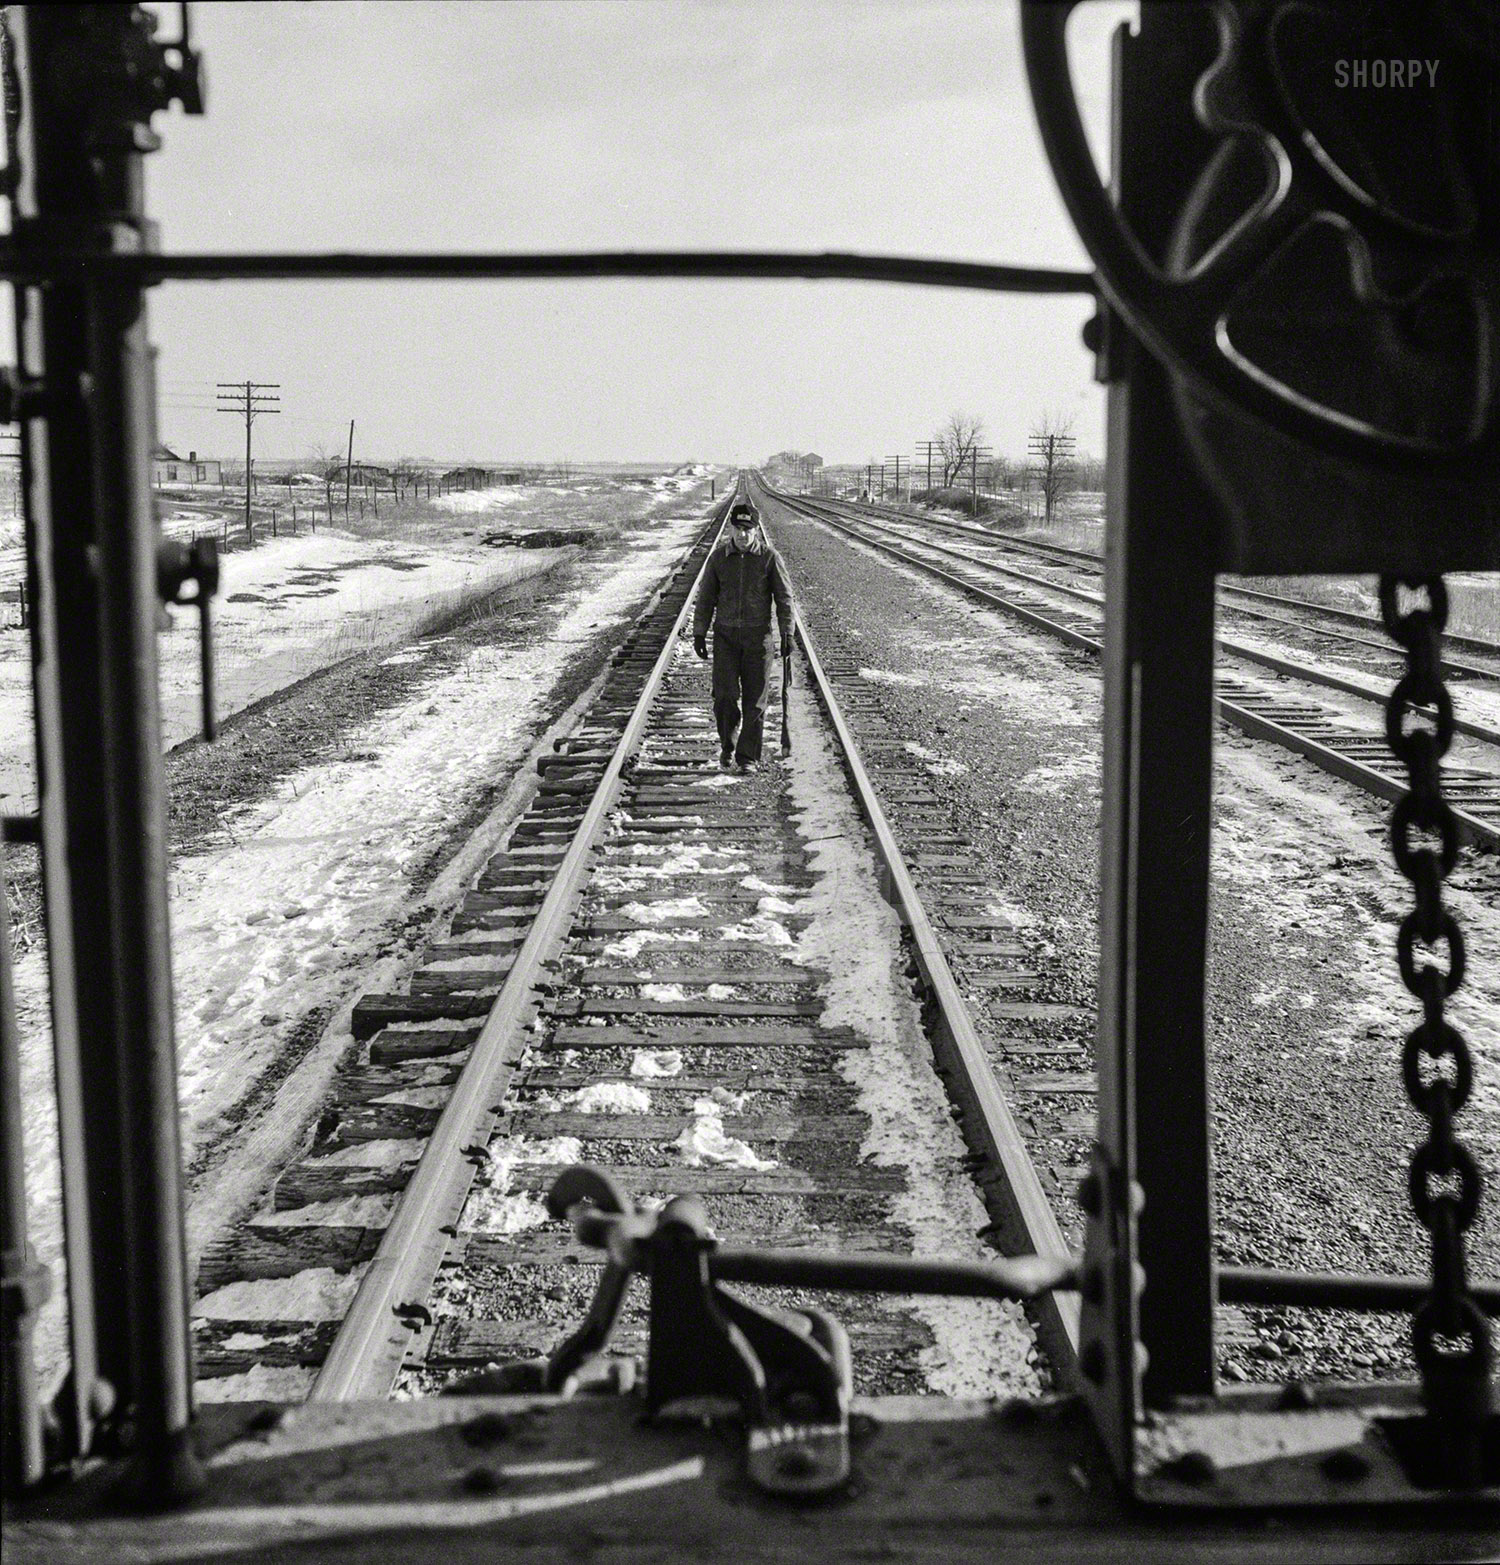 March 1943. "Baring, Missouri. A flagman returning to a train on the Atchison, Topeka & Santa Fe Railroad about to start, after having taken on coal and water." Photo by Jack Delano for the Office of War Information. View full size.